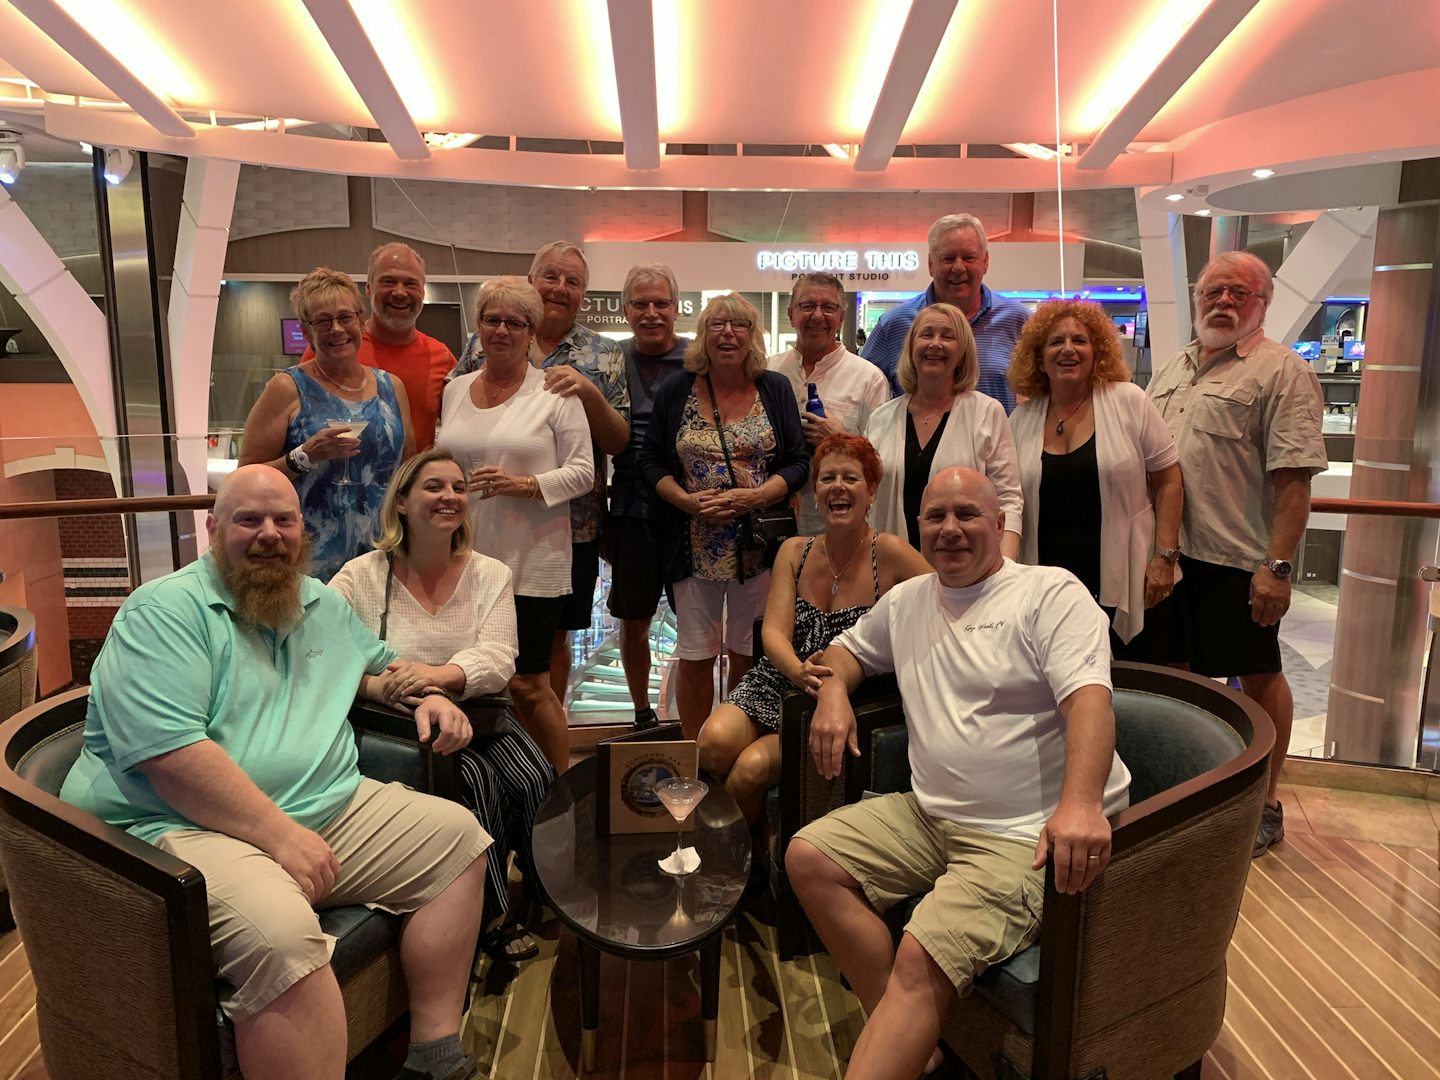 Our group at the Schooner Bar